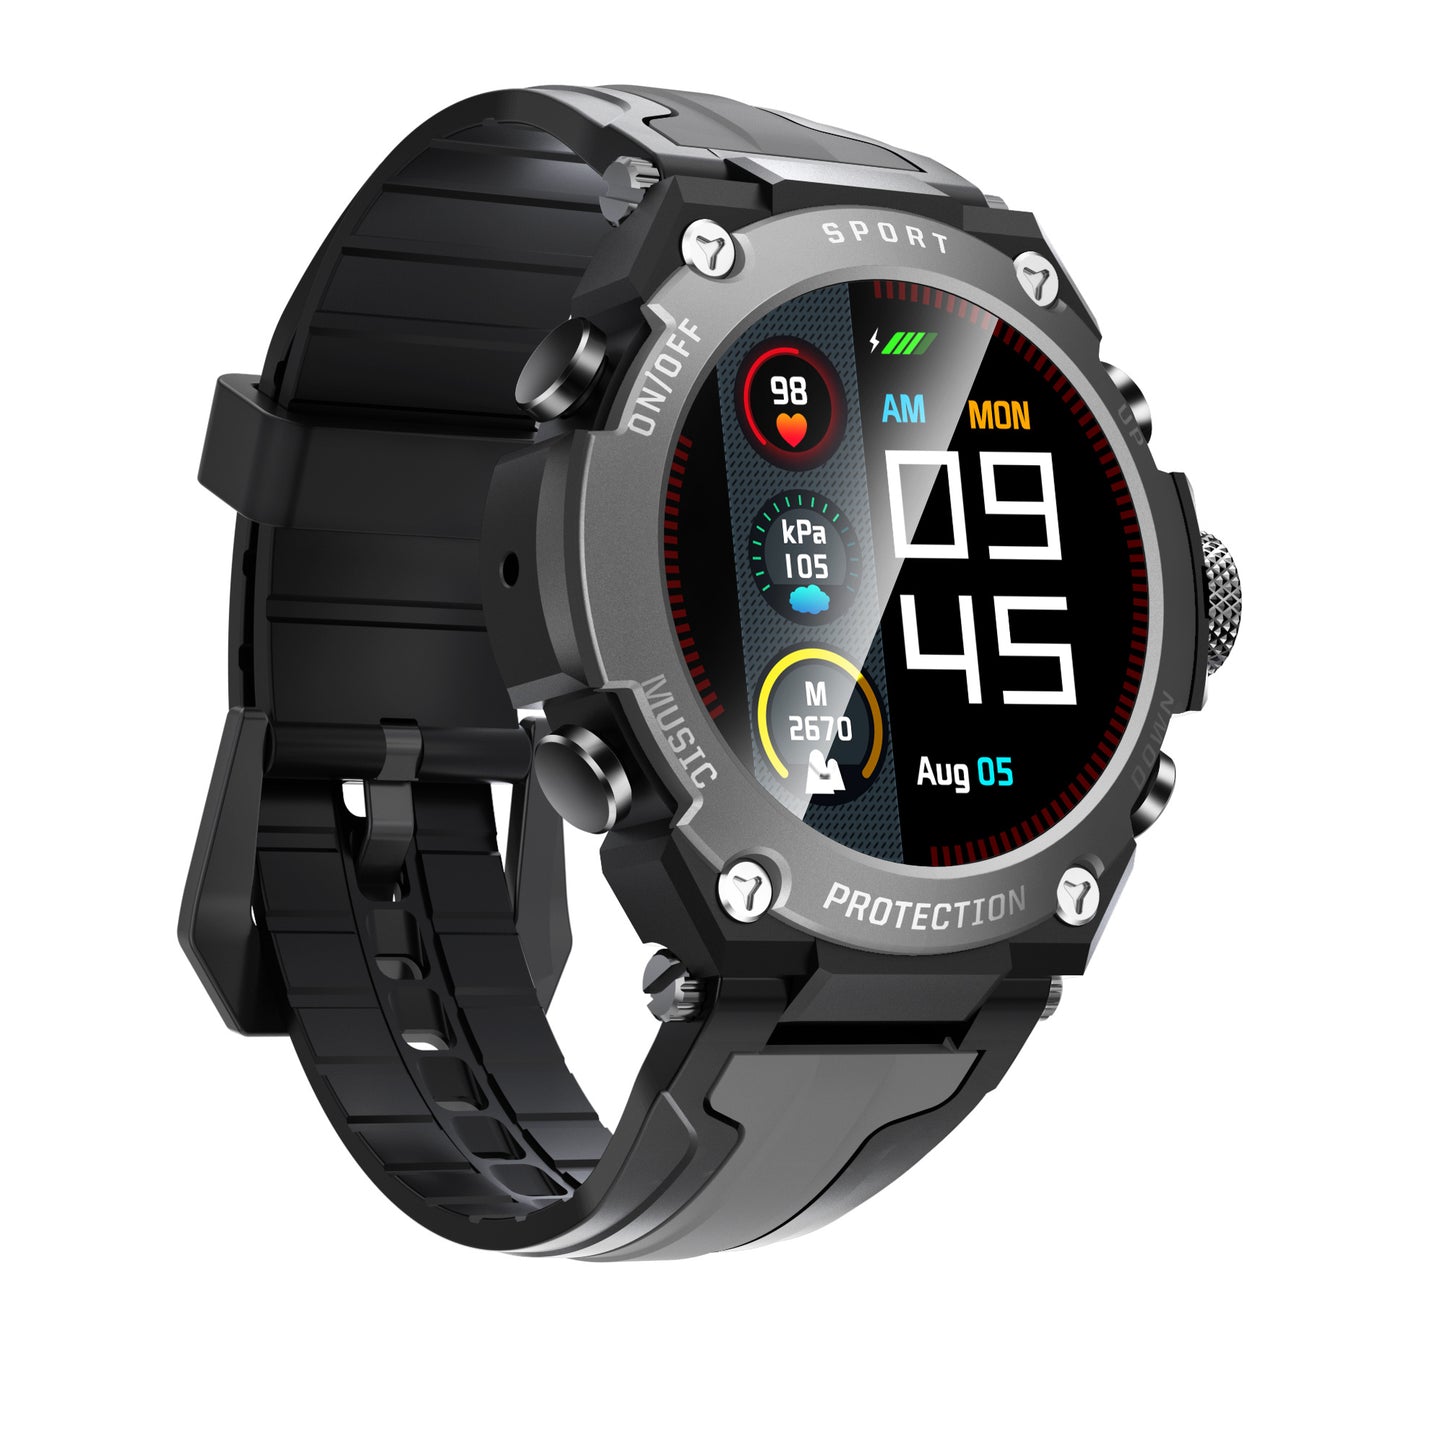 Outdoor sports smart watches, multiple sports, weather, health monitoring, heart rate monitoring, remote camera music control